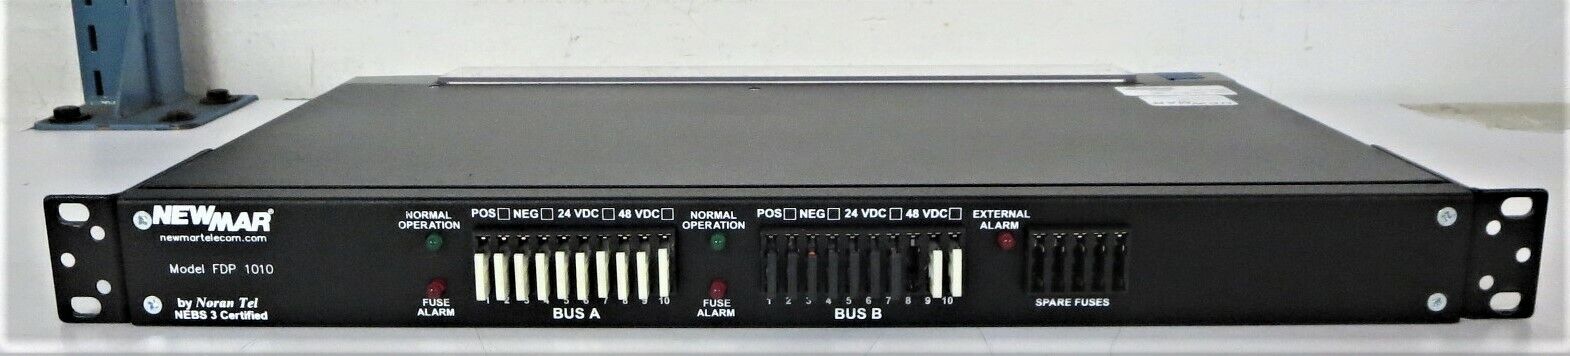 Newmar Fdp-1010 20 Bus 15a Gmt Fuse Panel